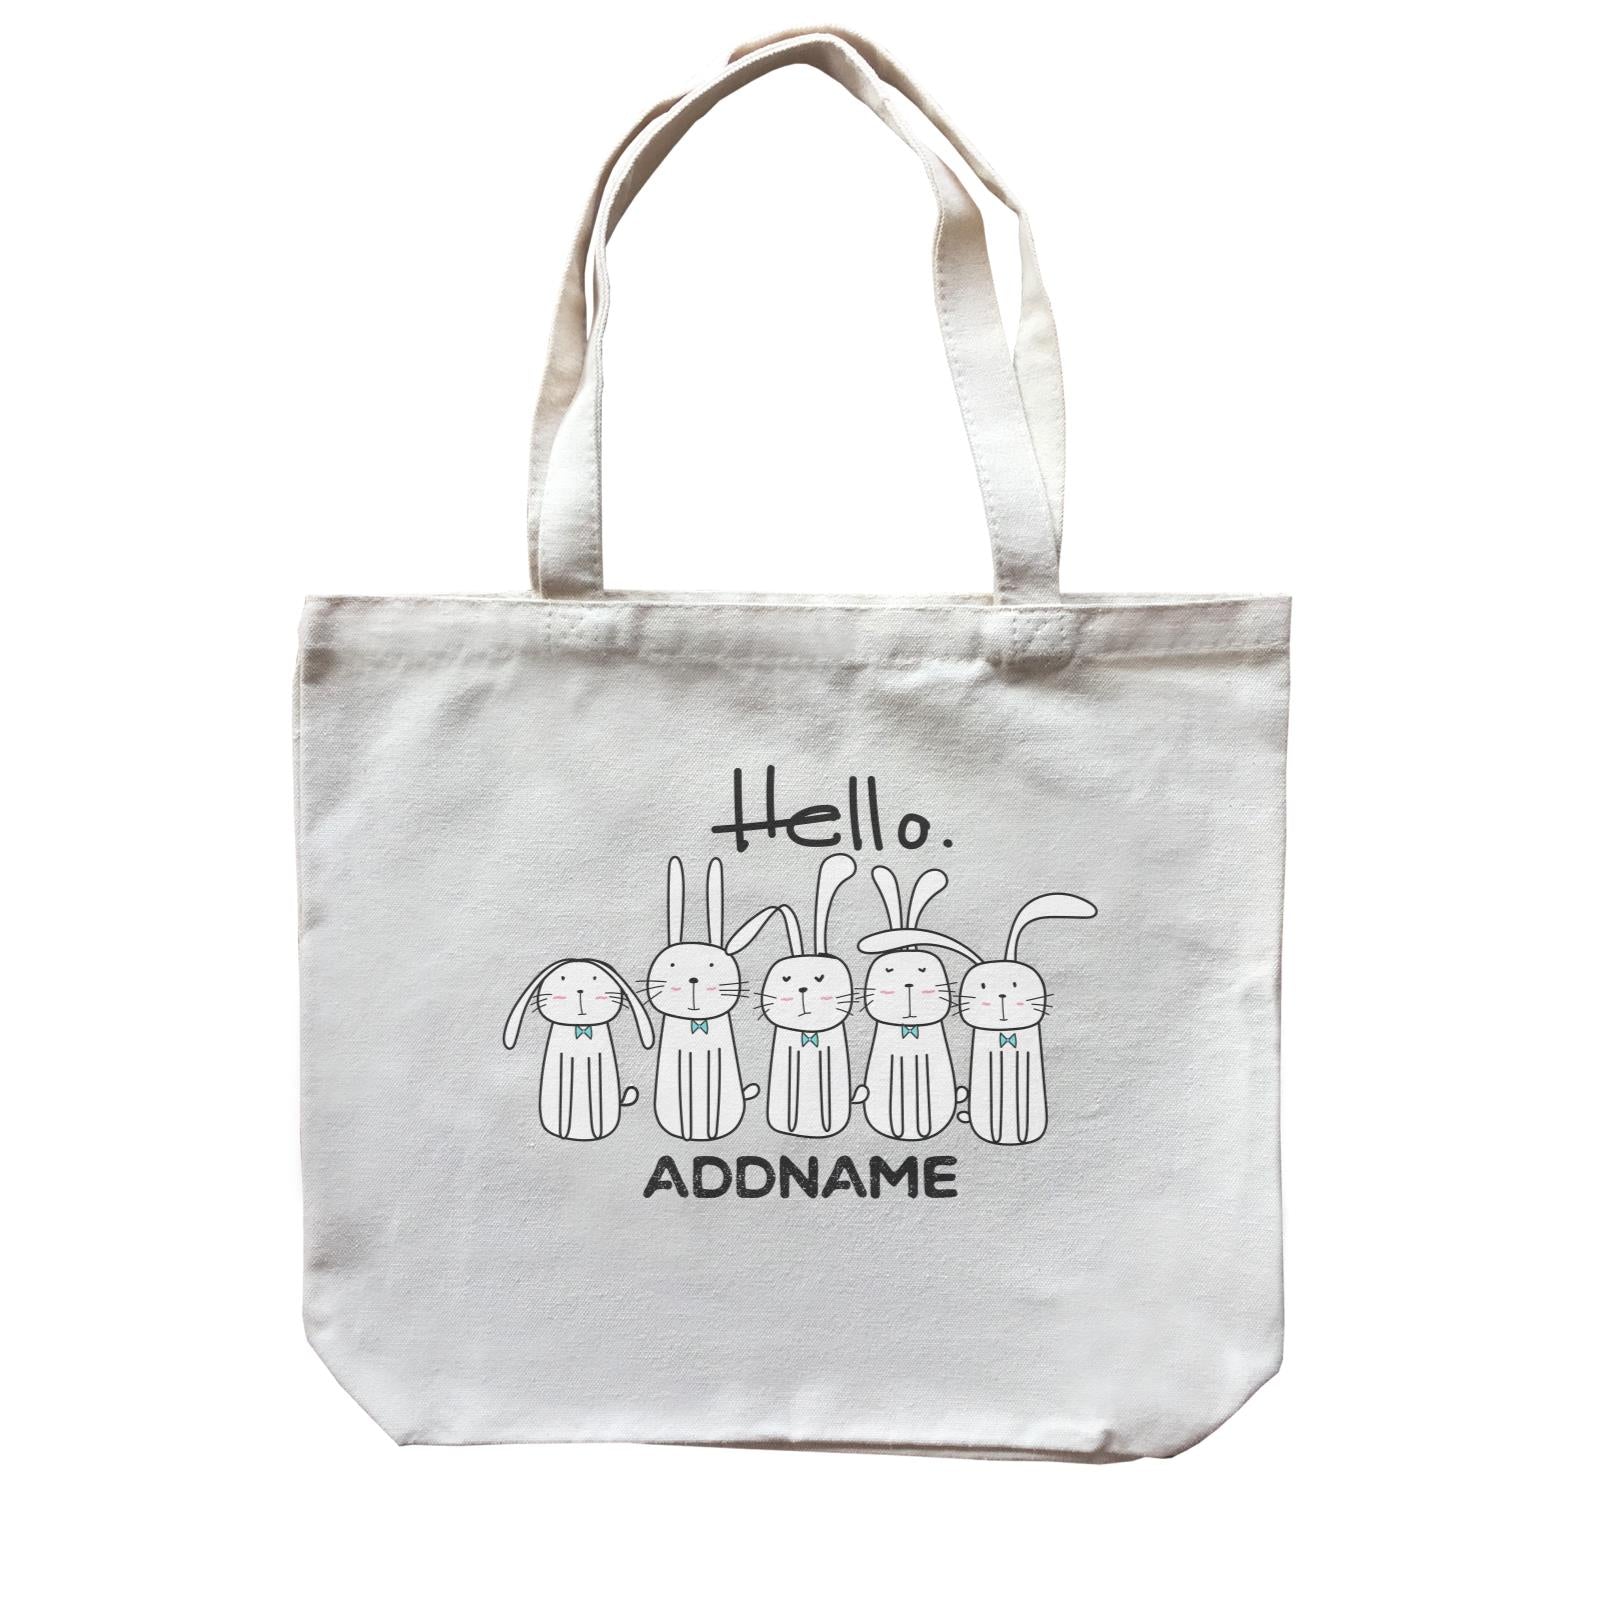 Cute Animals And Friends Series Hello Rabbits Group Addname Canvas Bag